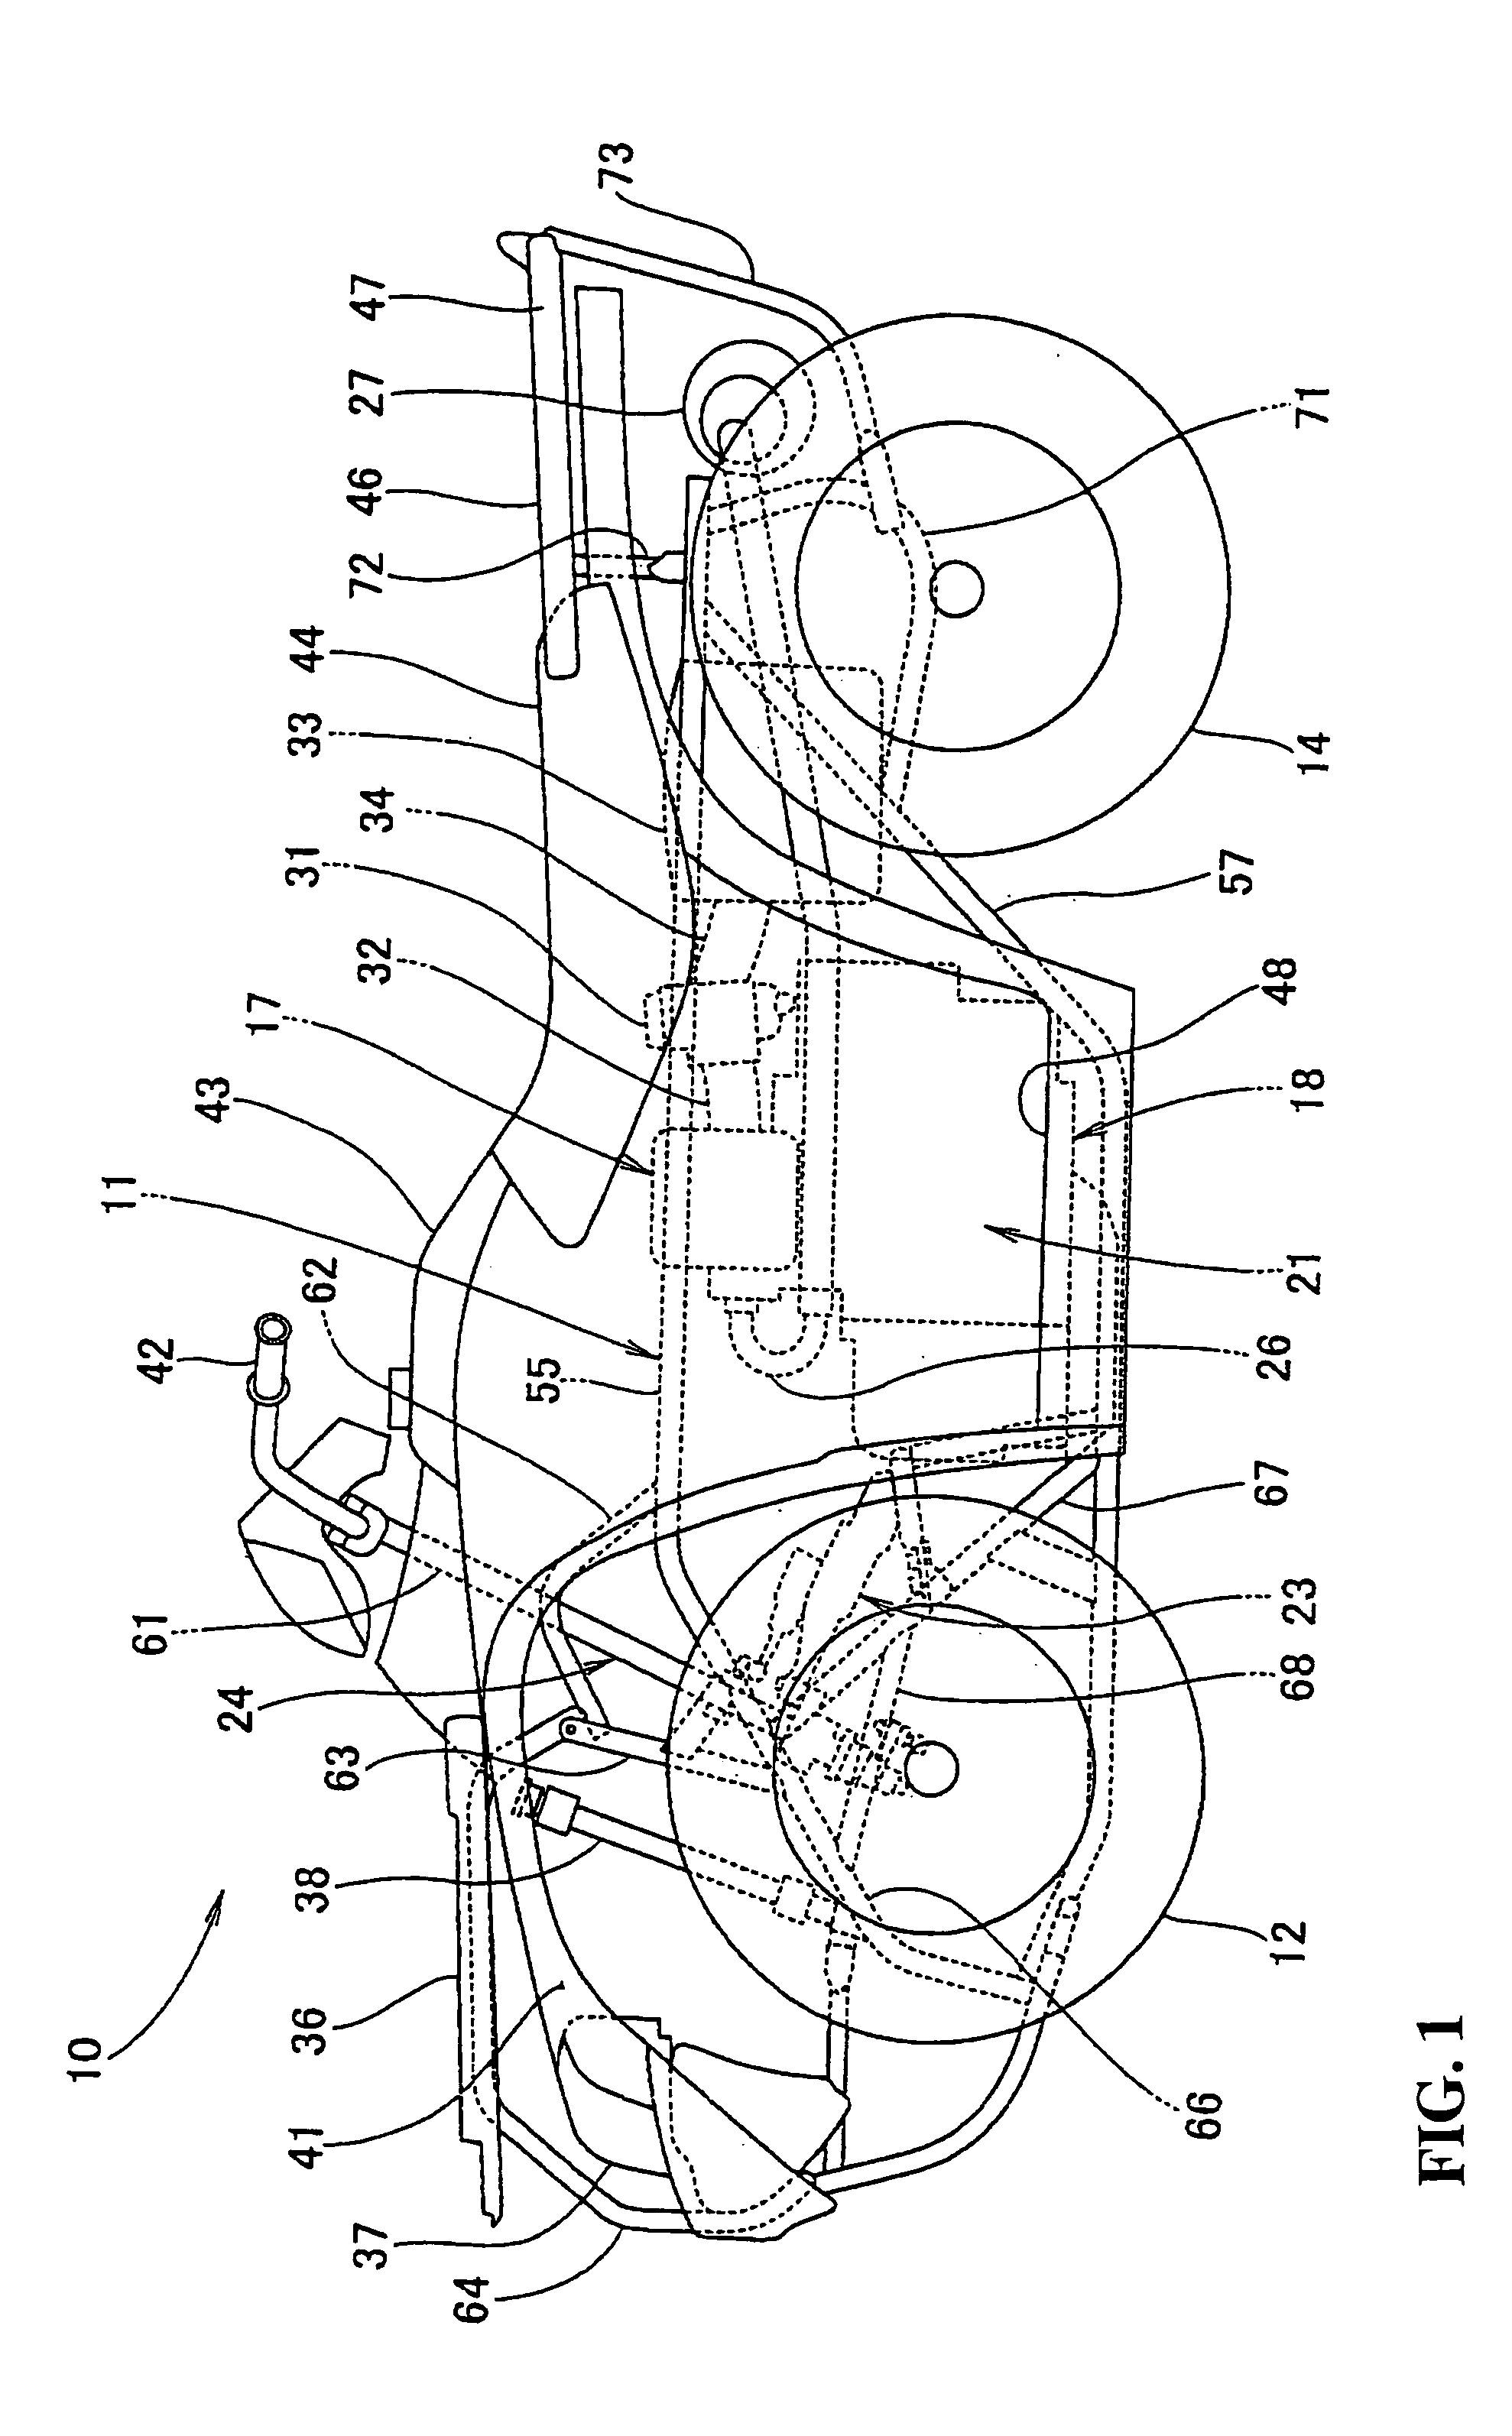 Layout structure of power steering system for vehicle